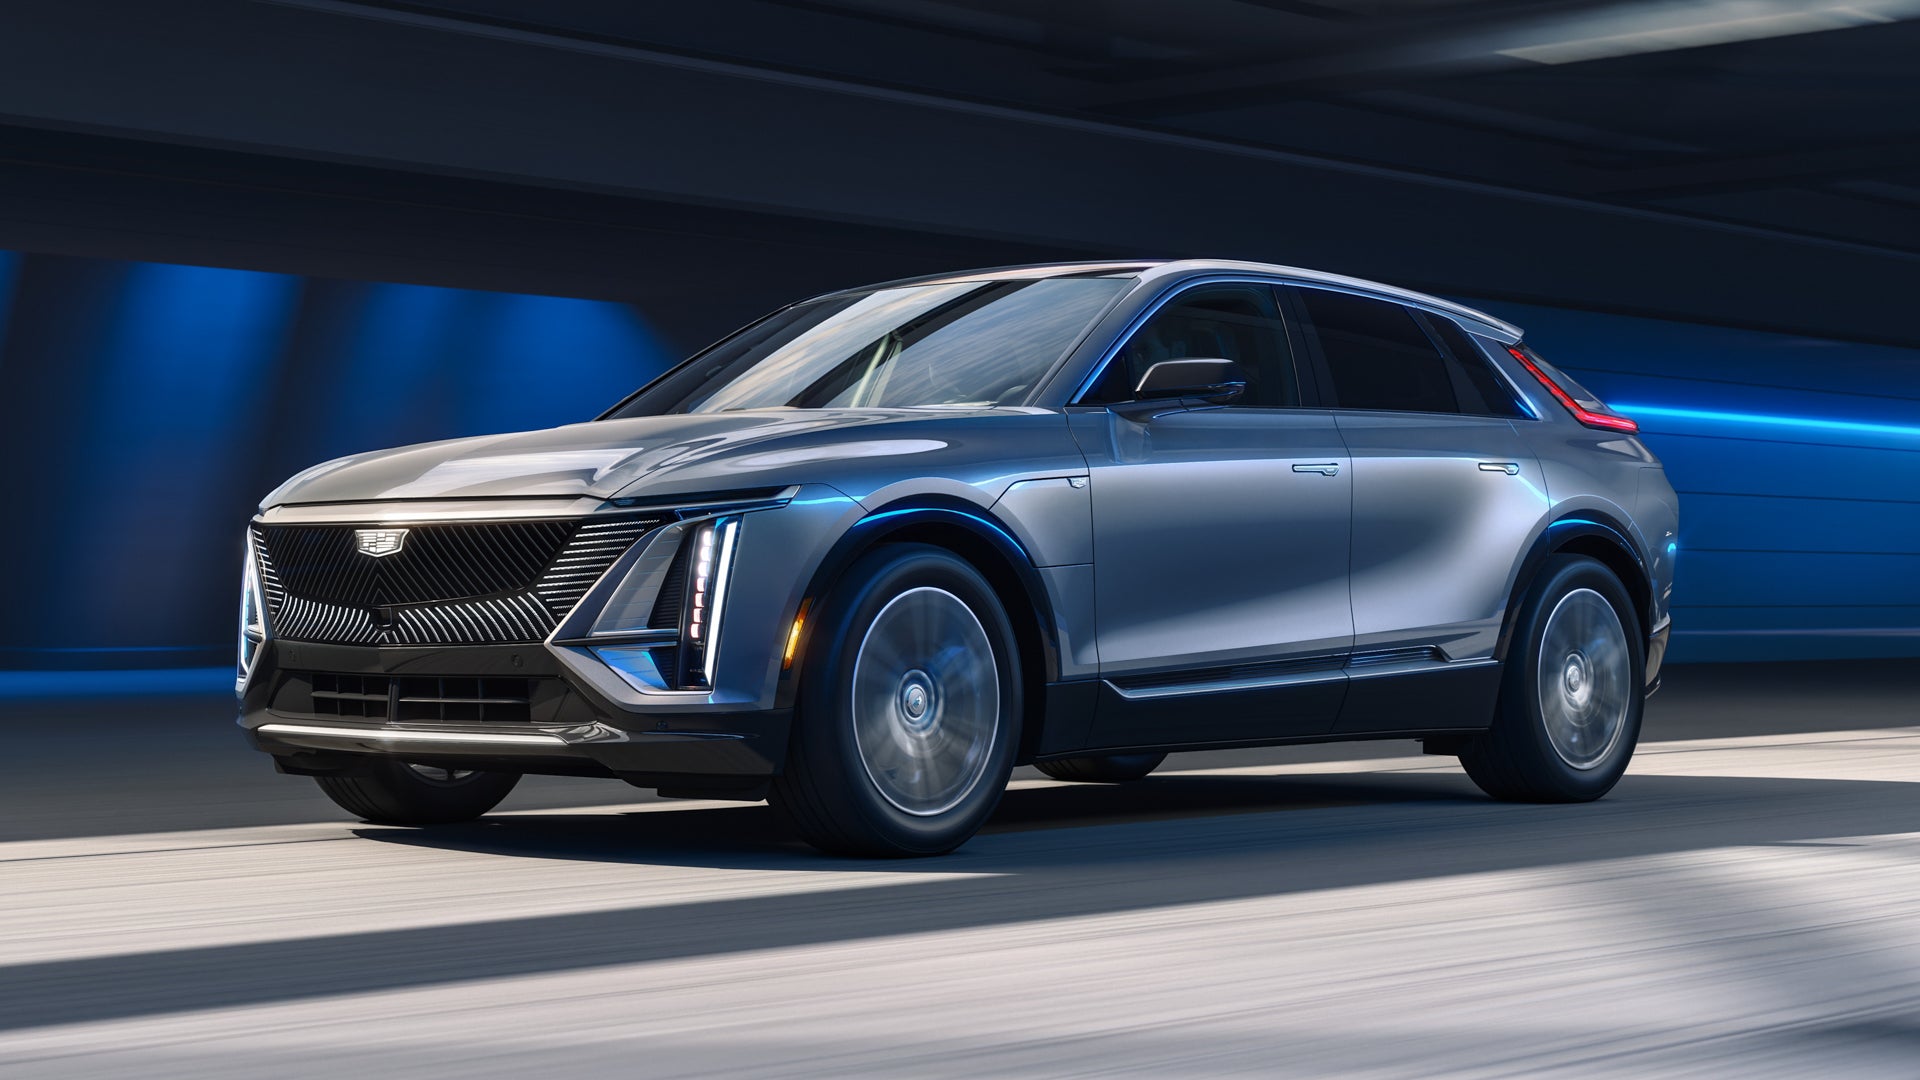 Cadillac is joining the ranks of Mercedes and Tesla by offering an over-the-air power and performance upgrade for its electric Lyriq SUV. For $1,200 (